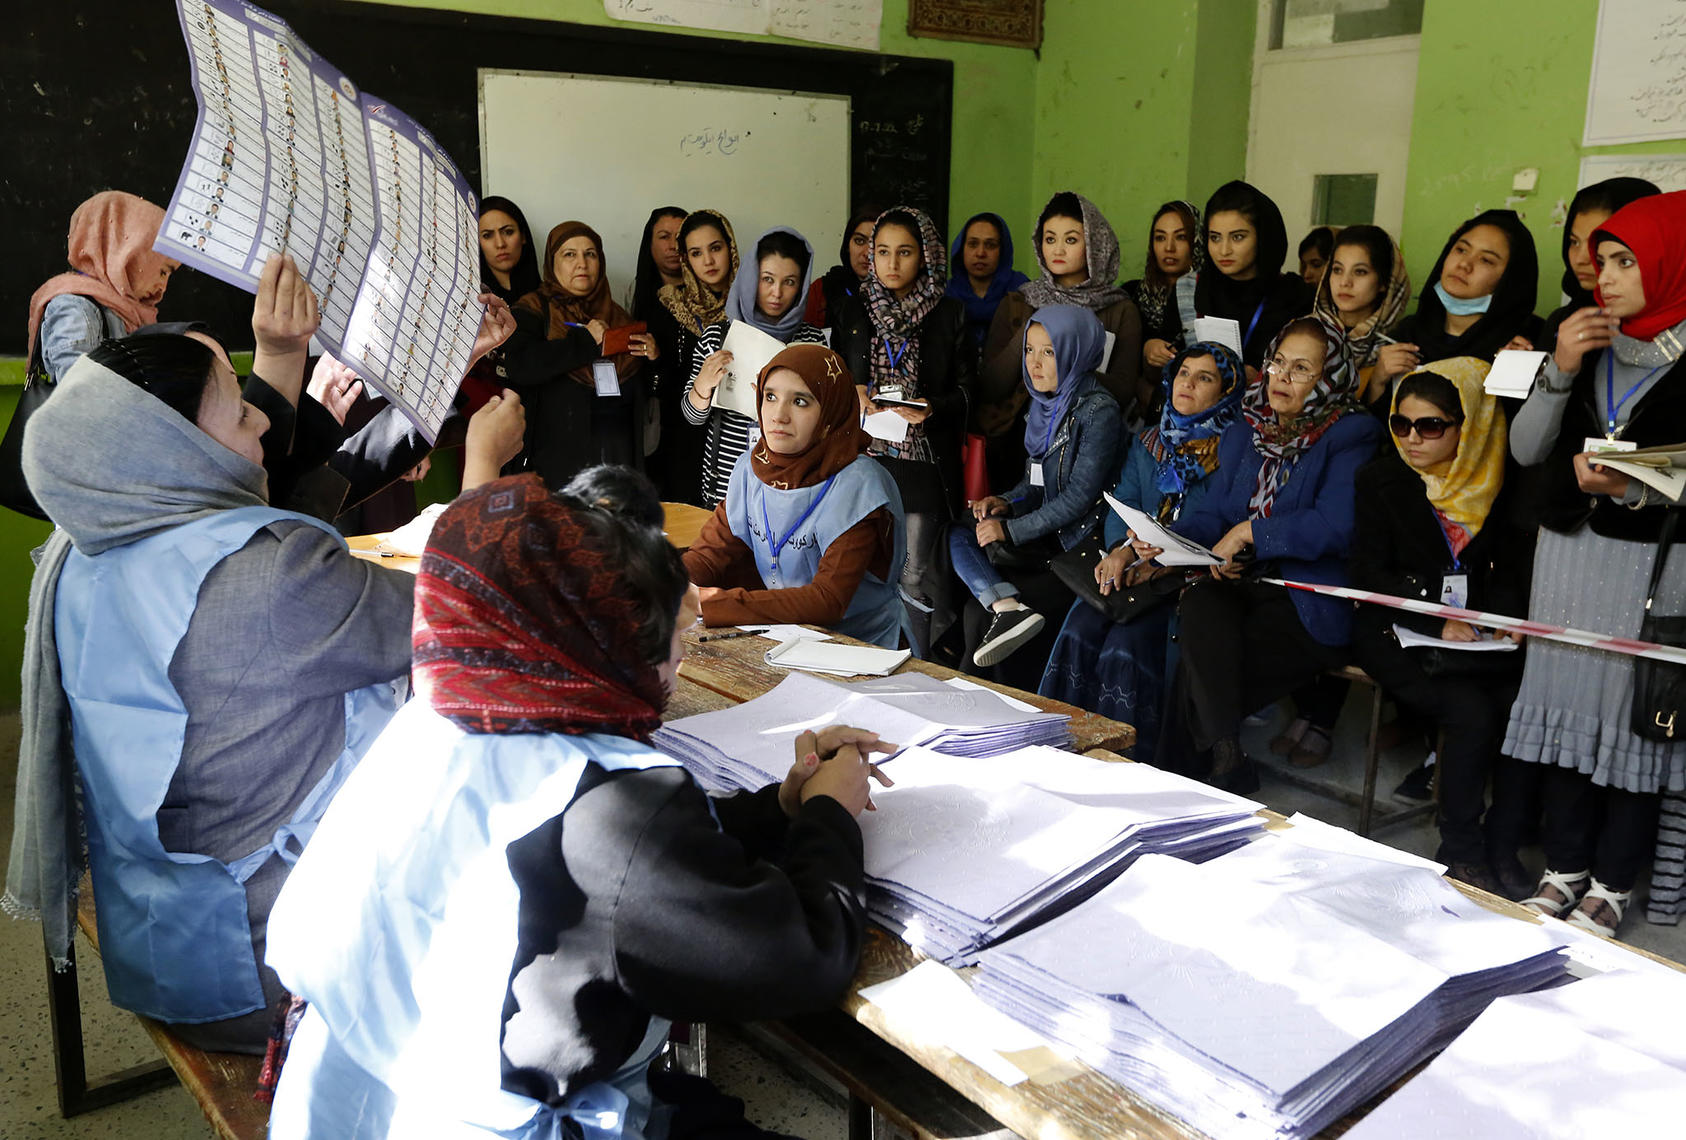 An electoral official examines a ballot in front of election observers during the 2018 parliamentary elections in Kabul, Oct. 21, 2018. (Fardin Waezi/UNAMA)